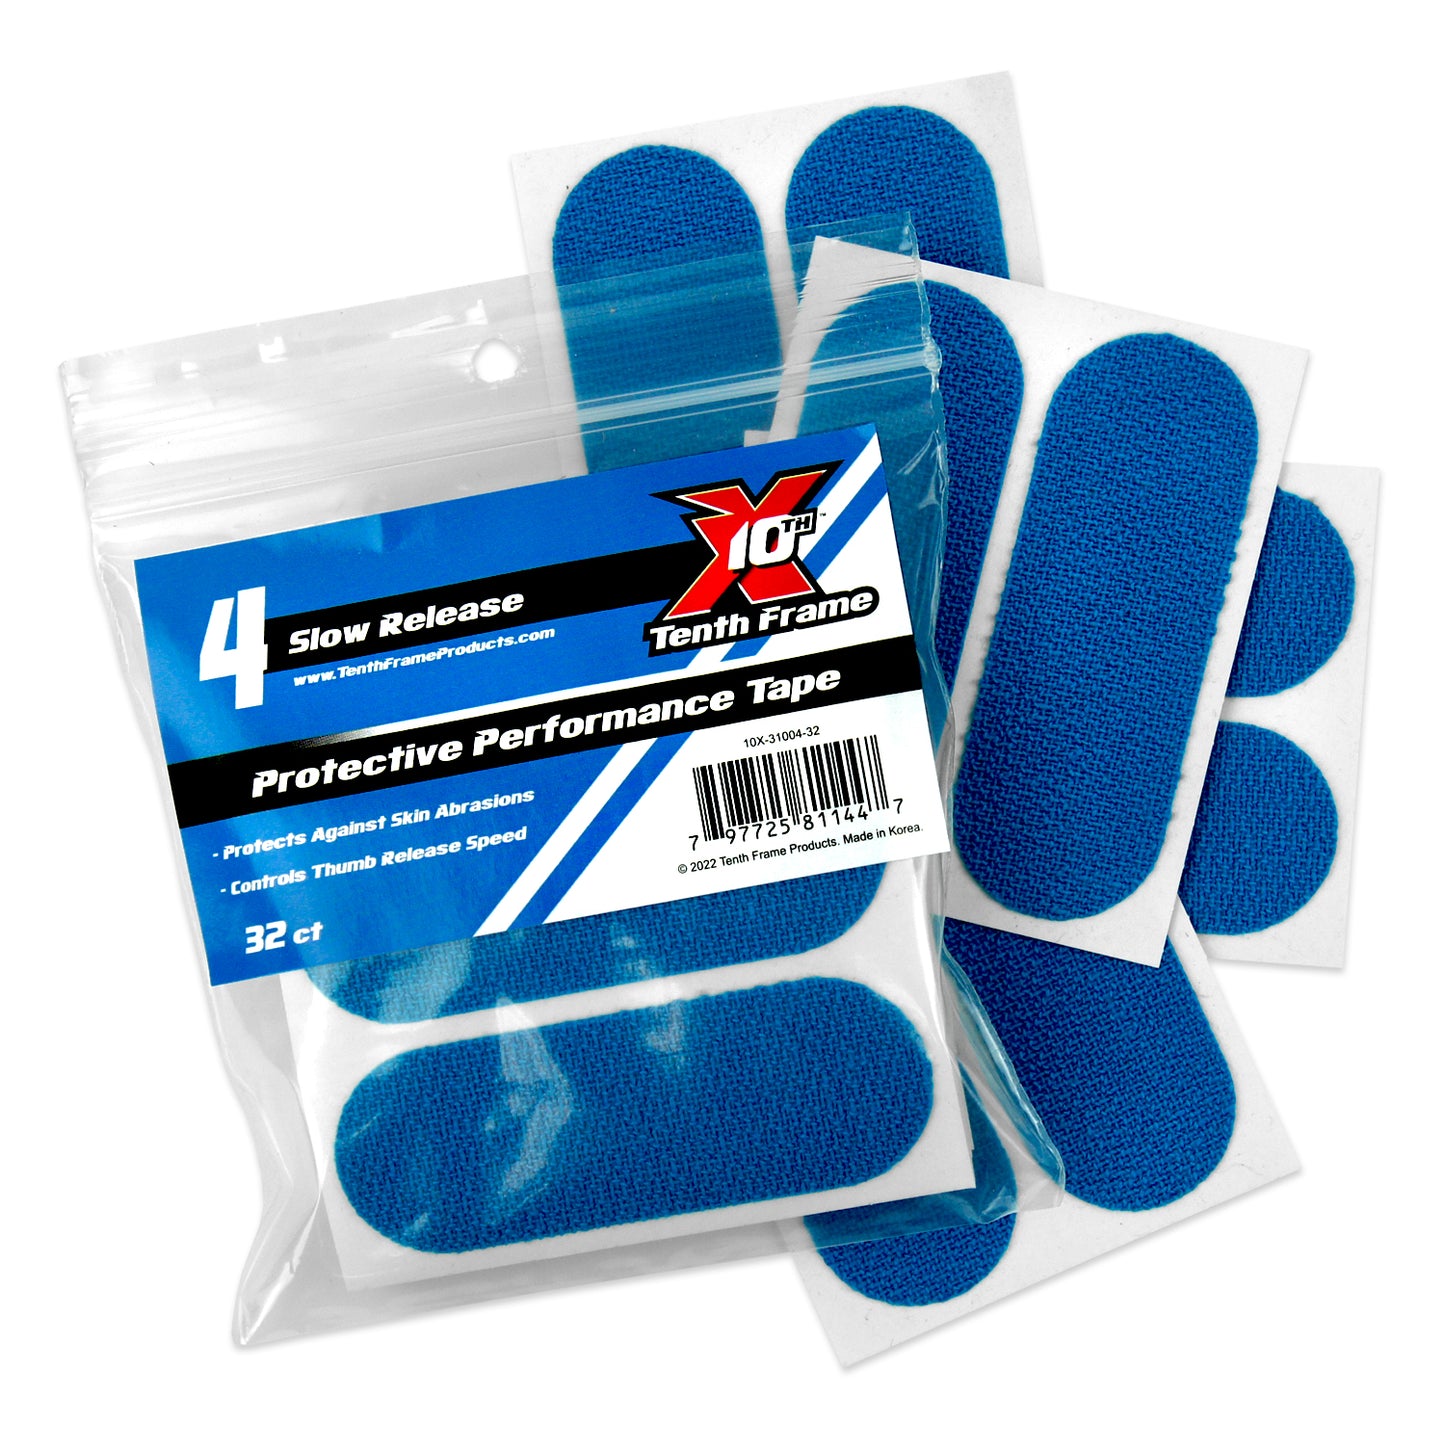 Tenth Frame Protective Performance Tape - #4 Slow Release (Blue)